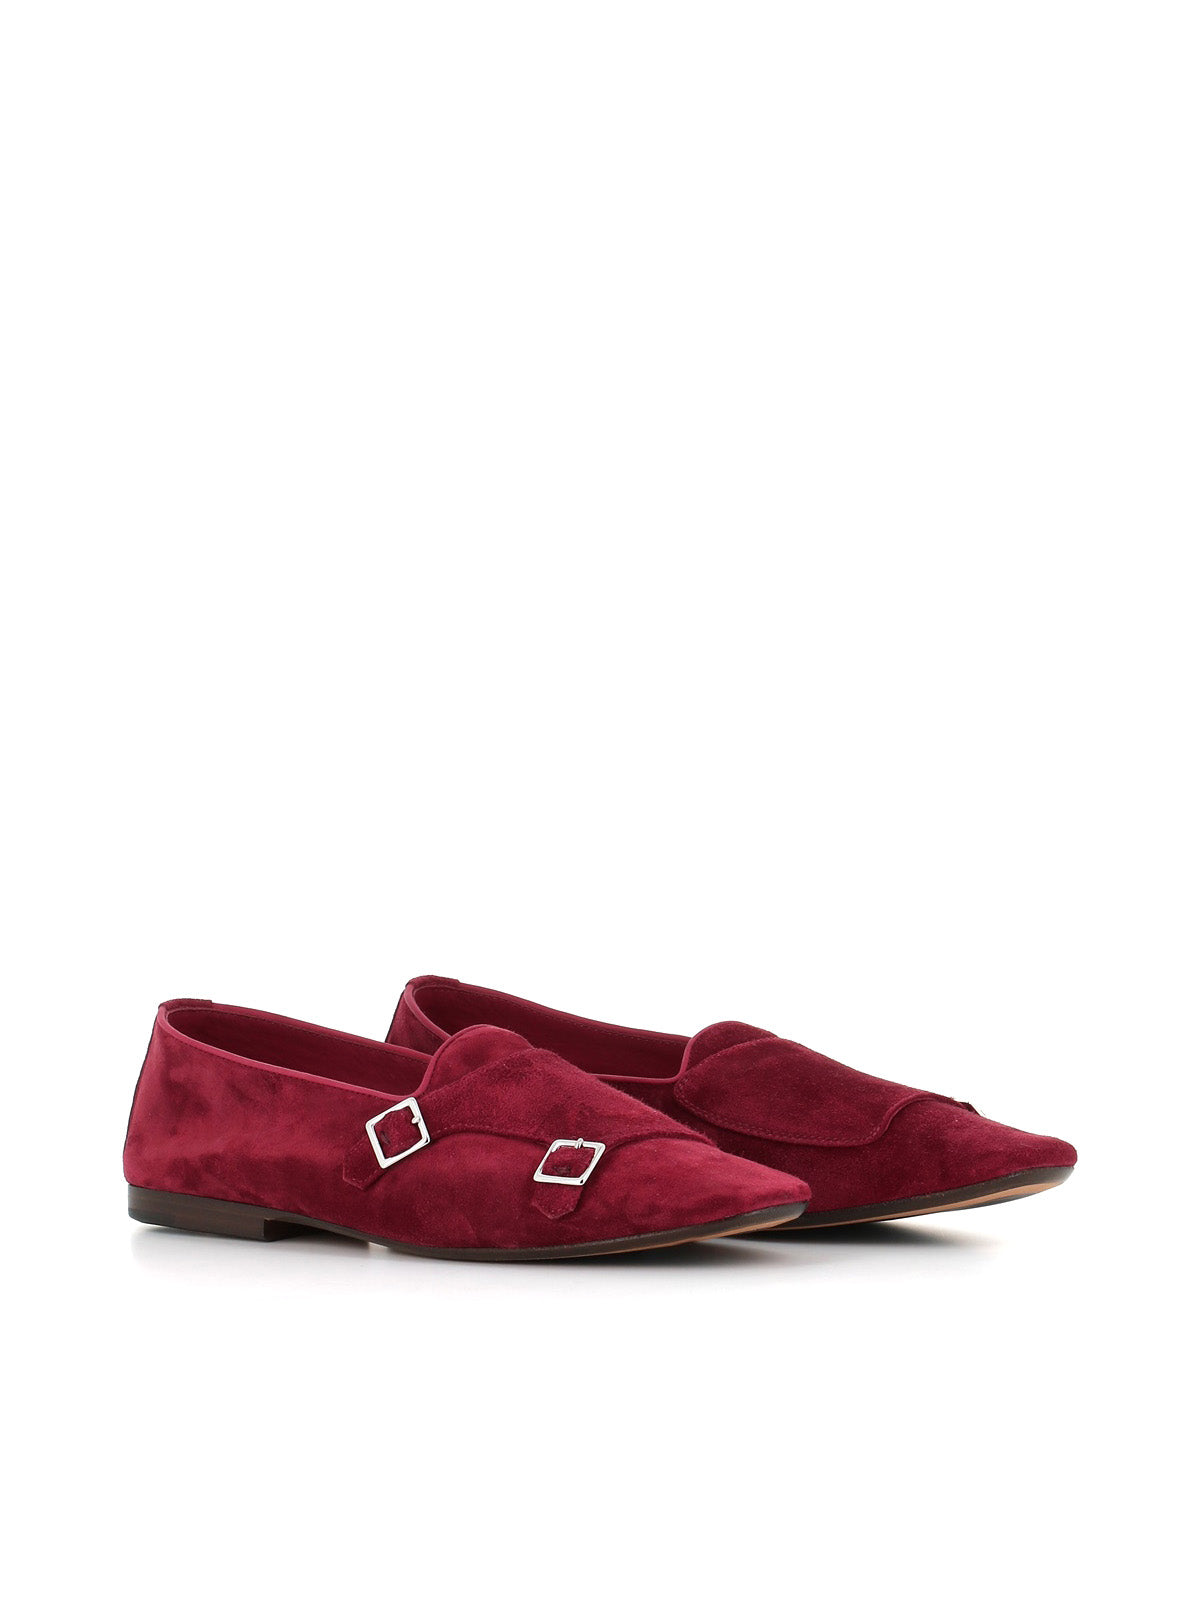  Buckle May.c.13 Henderson Baracco Donna Rosso - 2